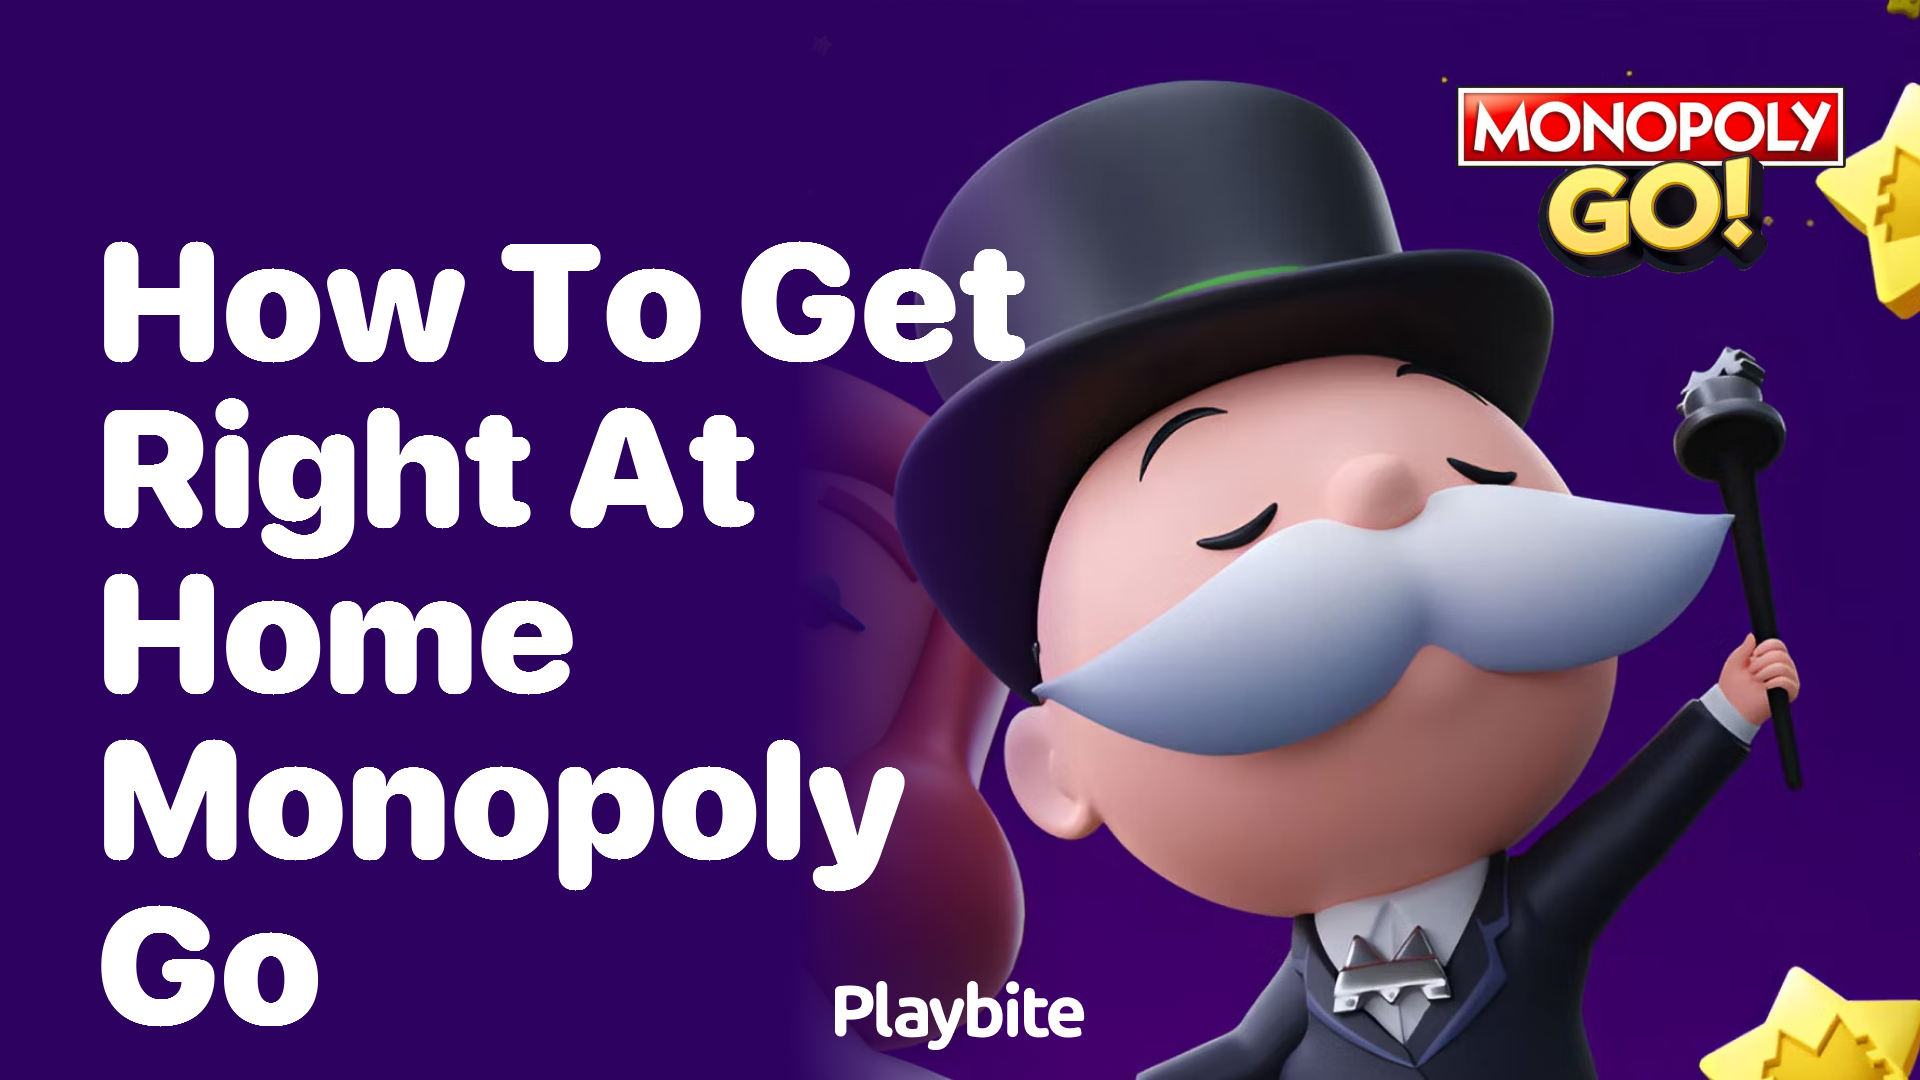 How to Get Right at Home with Monopoly Go